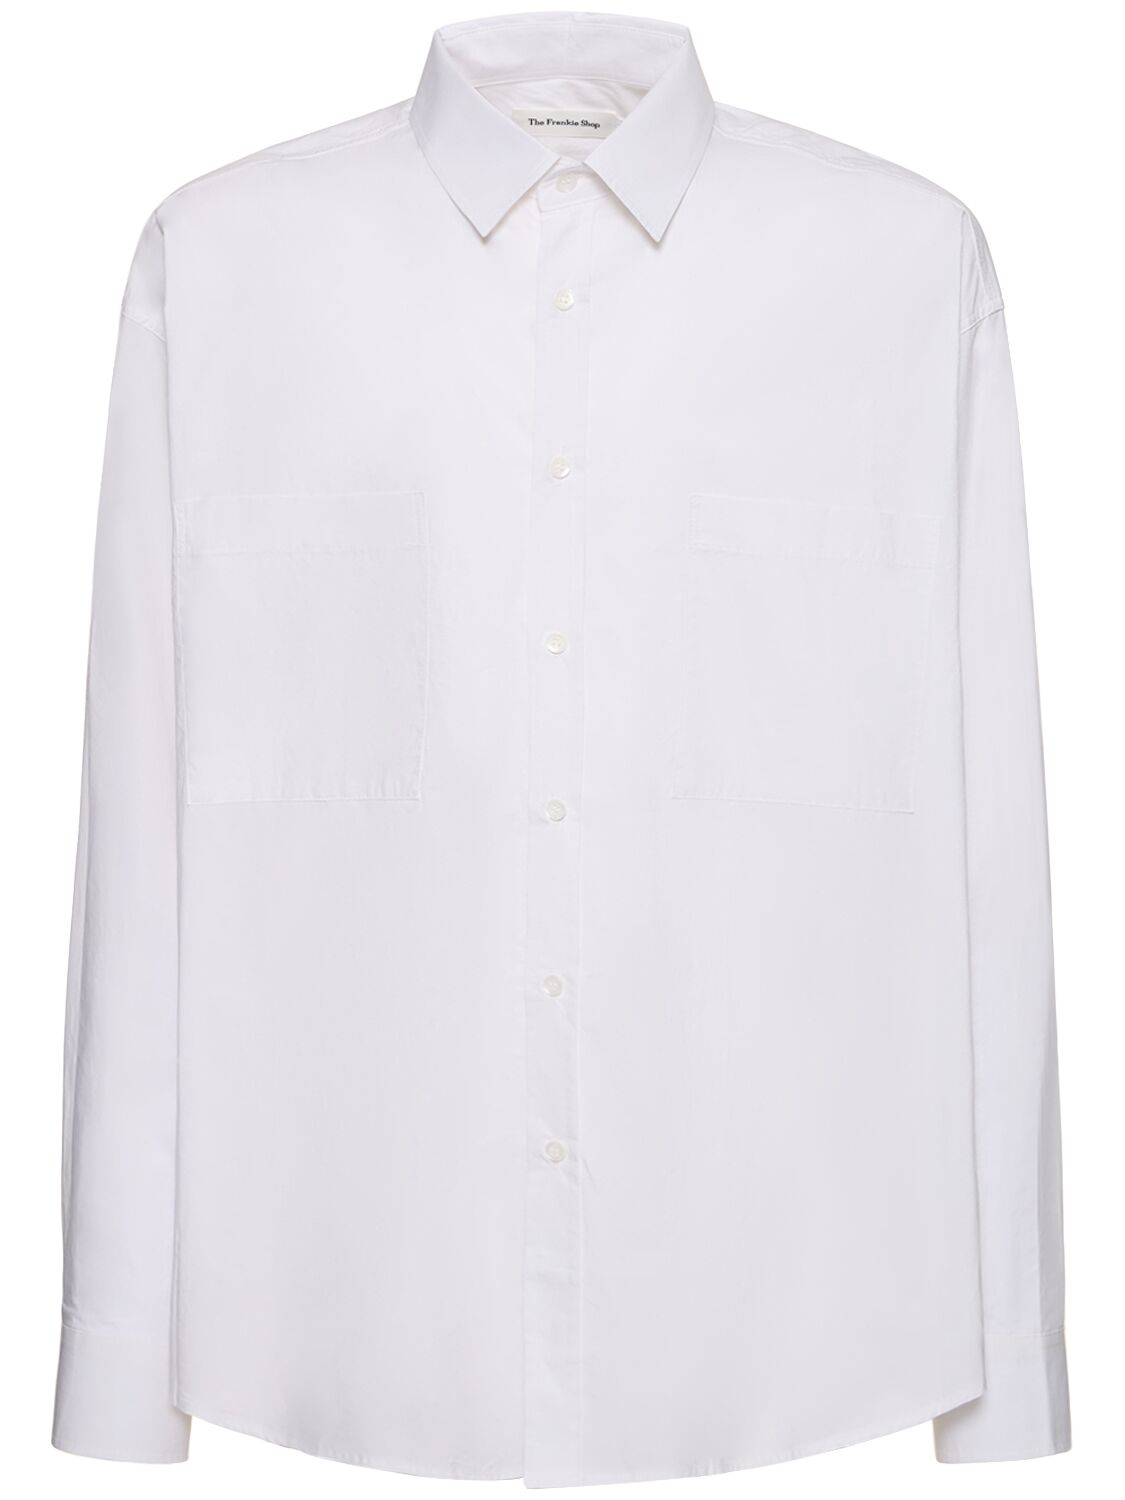 The Frankie Shop Gus Oversize Cotton Shirt In White